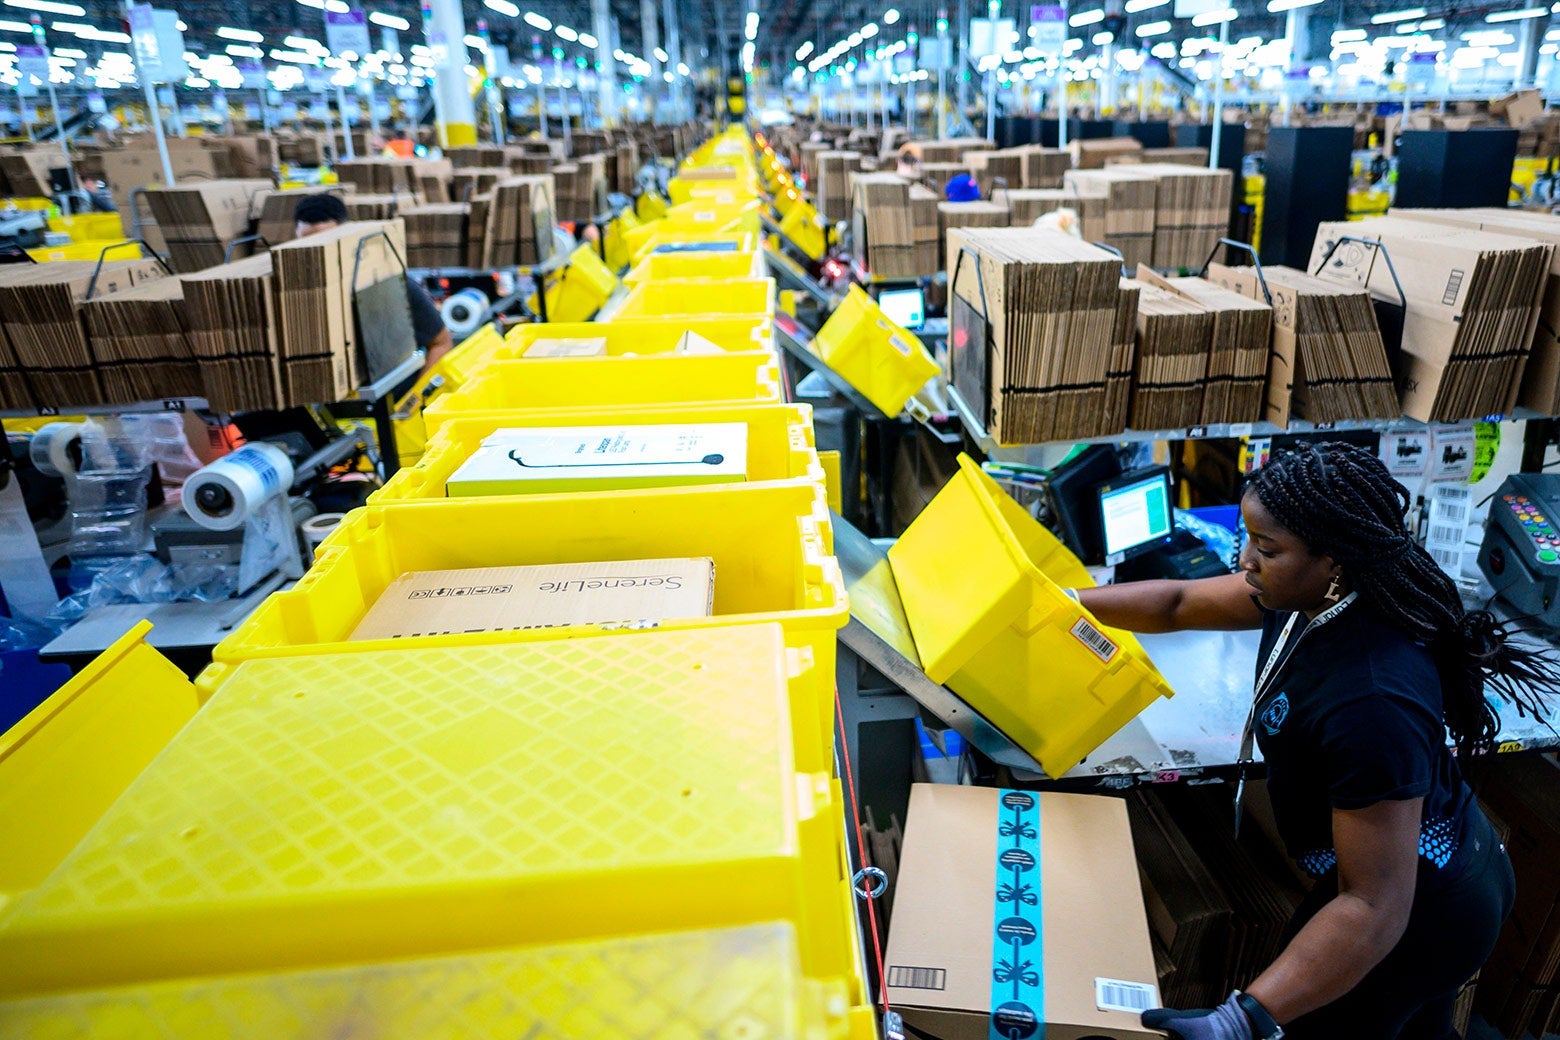 Amazon Prime Day What it’s like for fulfillment center workers.